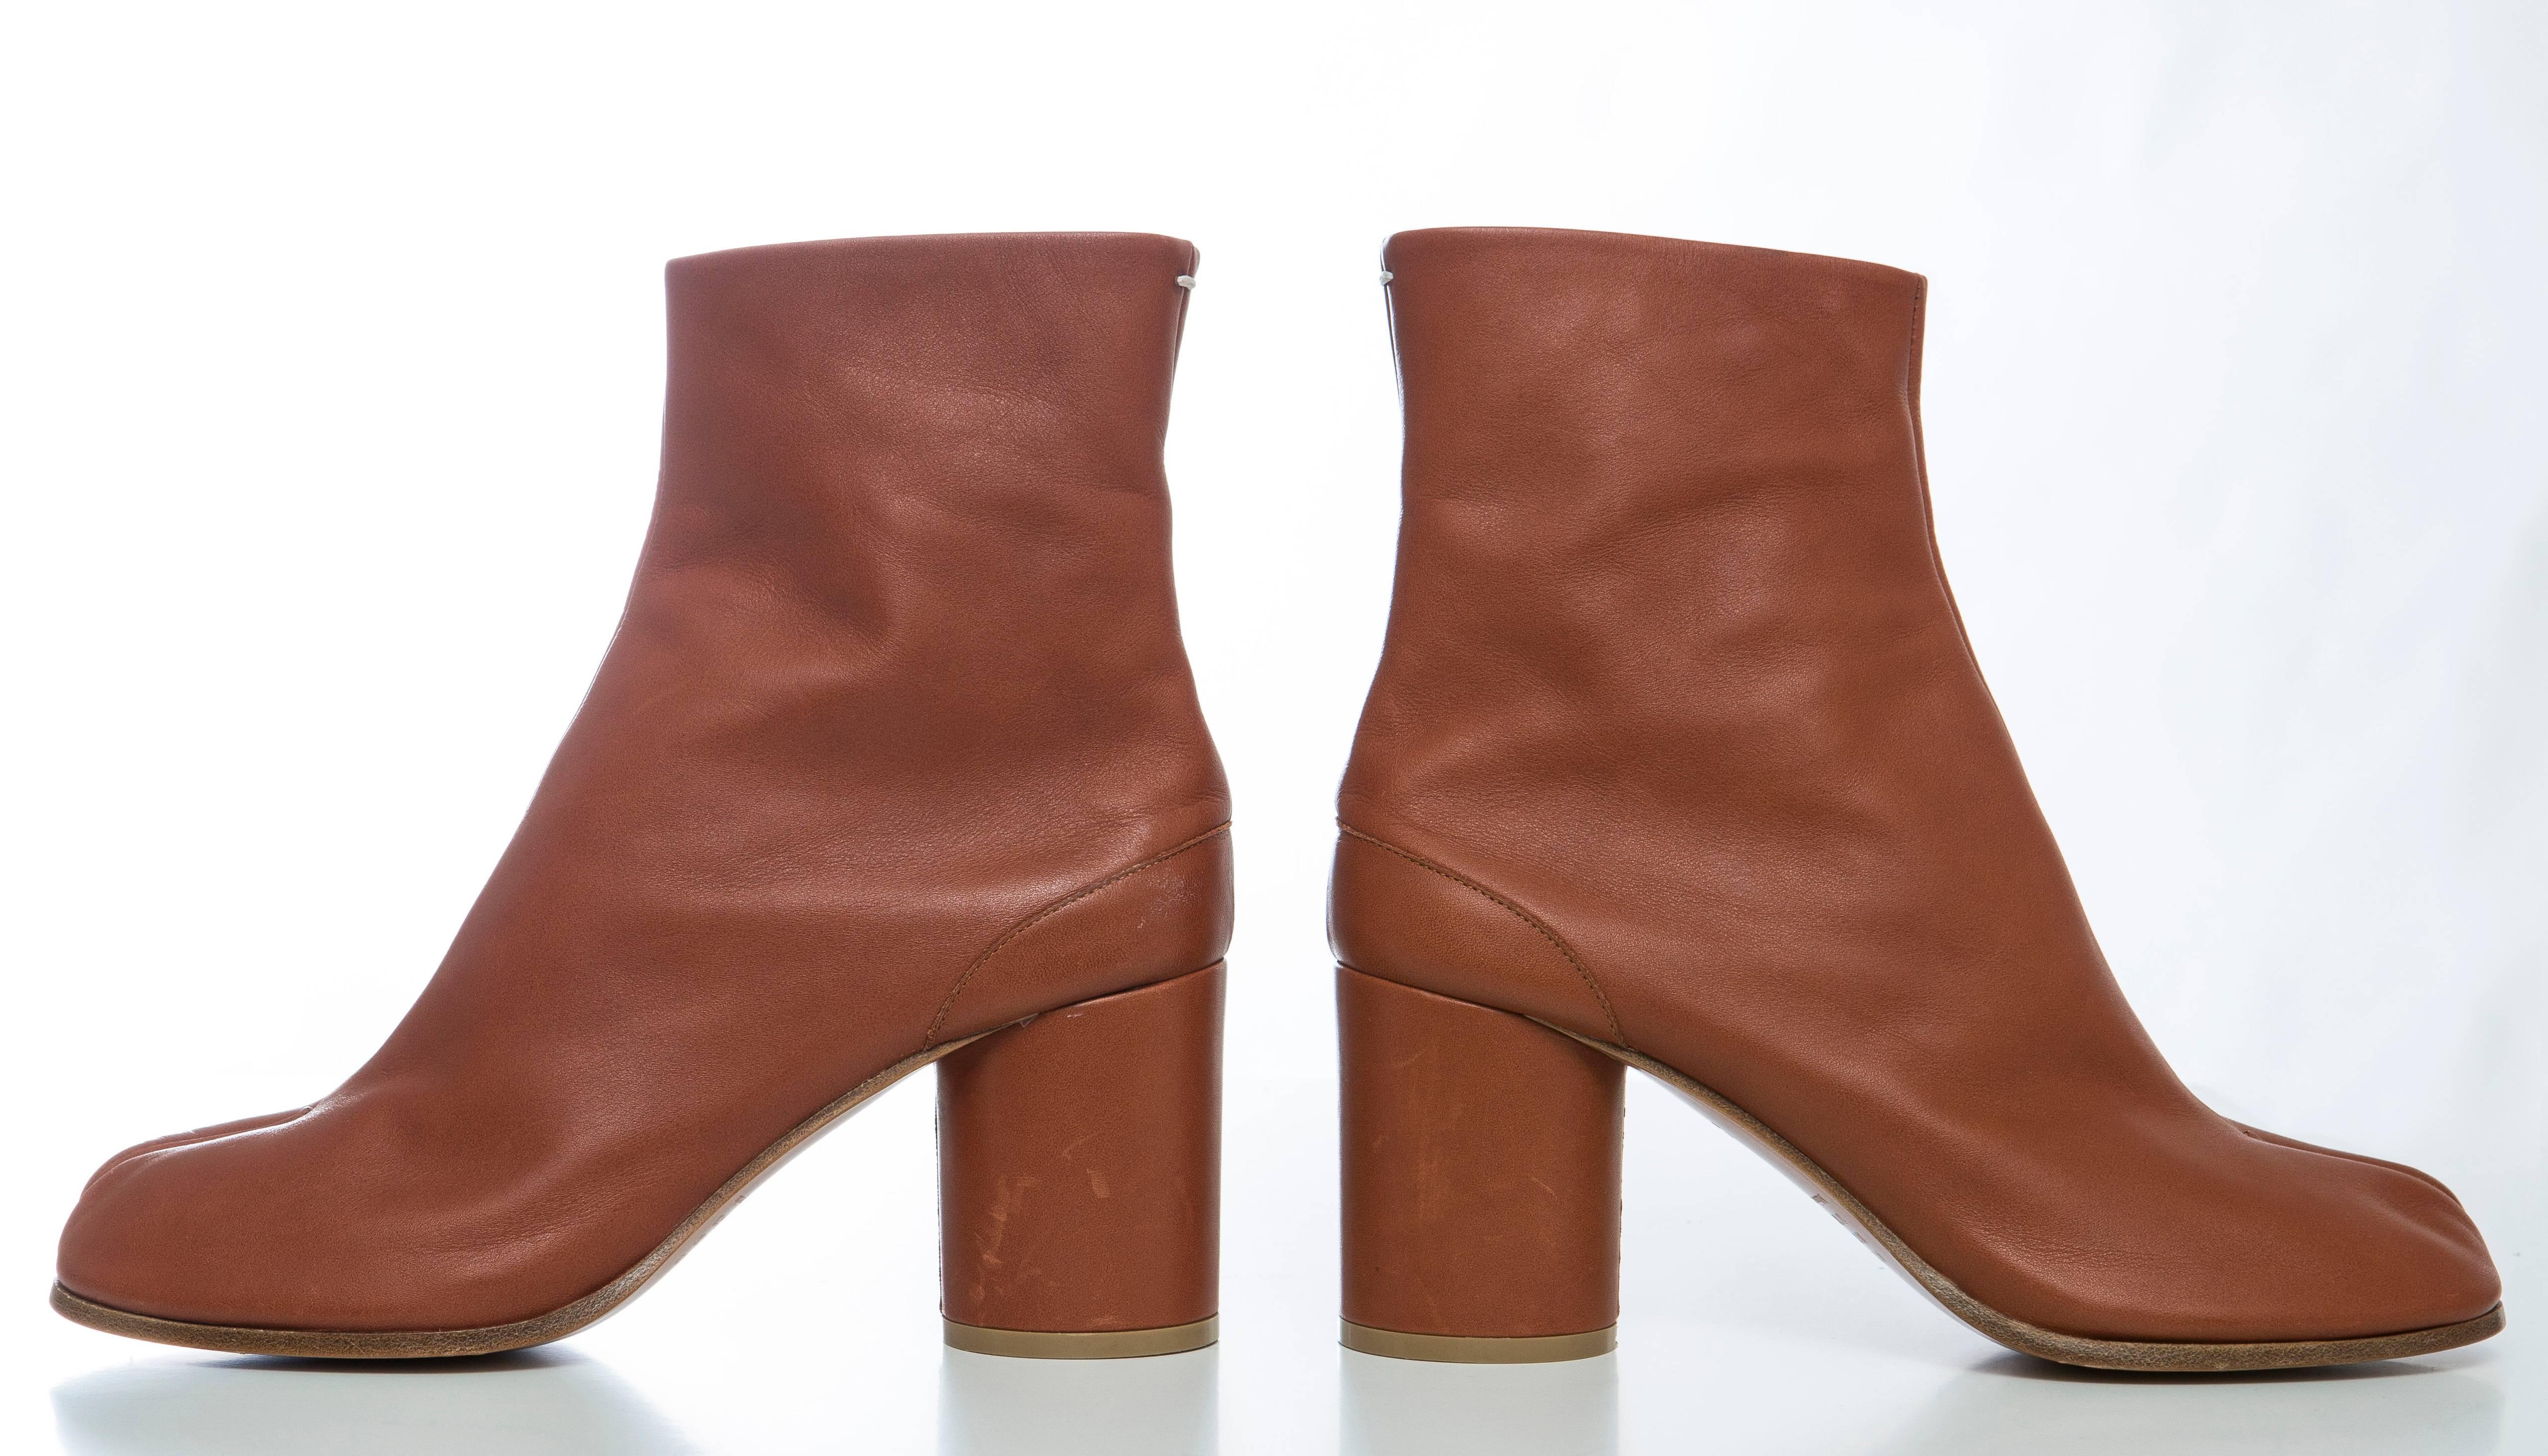 Maison Martin Margiela cognac leather Tabi ankle boots with tonal stitching and hook closures at backs.

EU. 40
US. 10